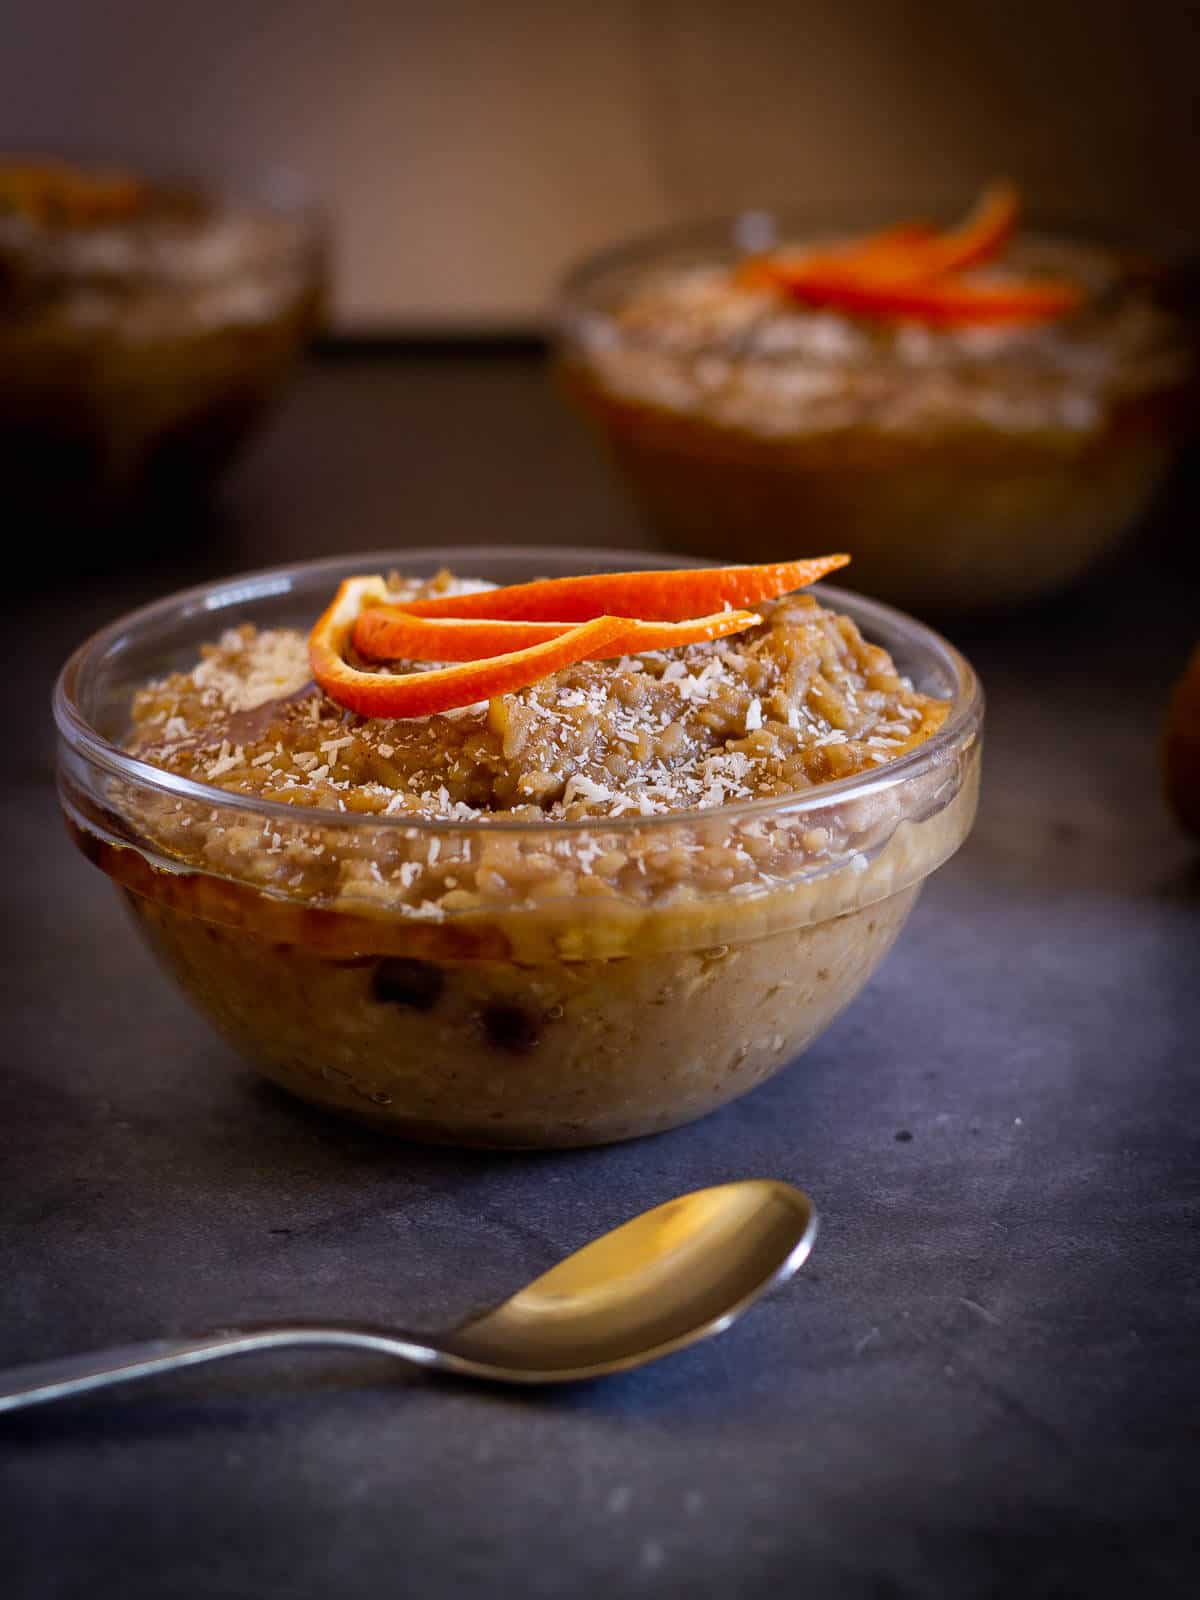 rice pudding served with clementine peels.